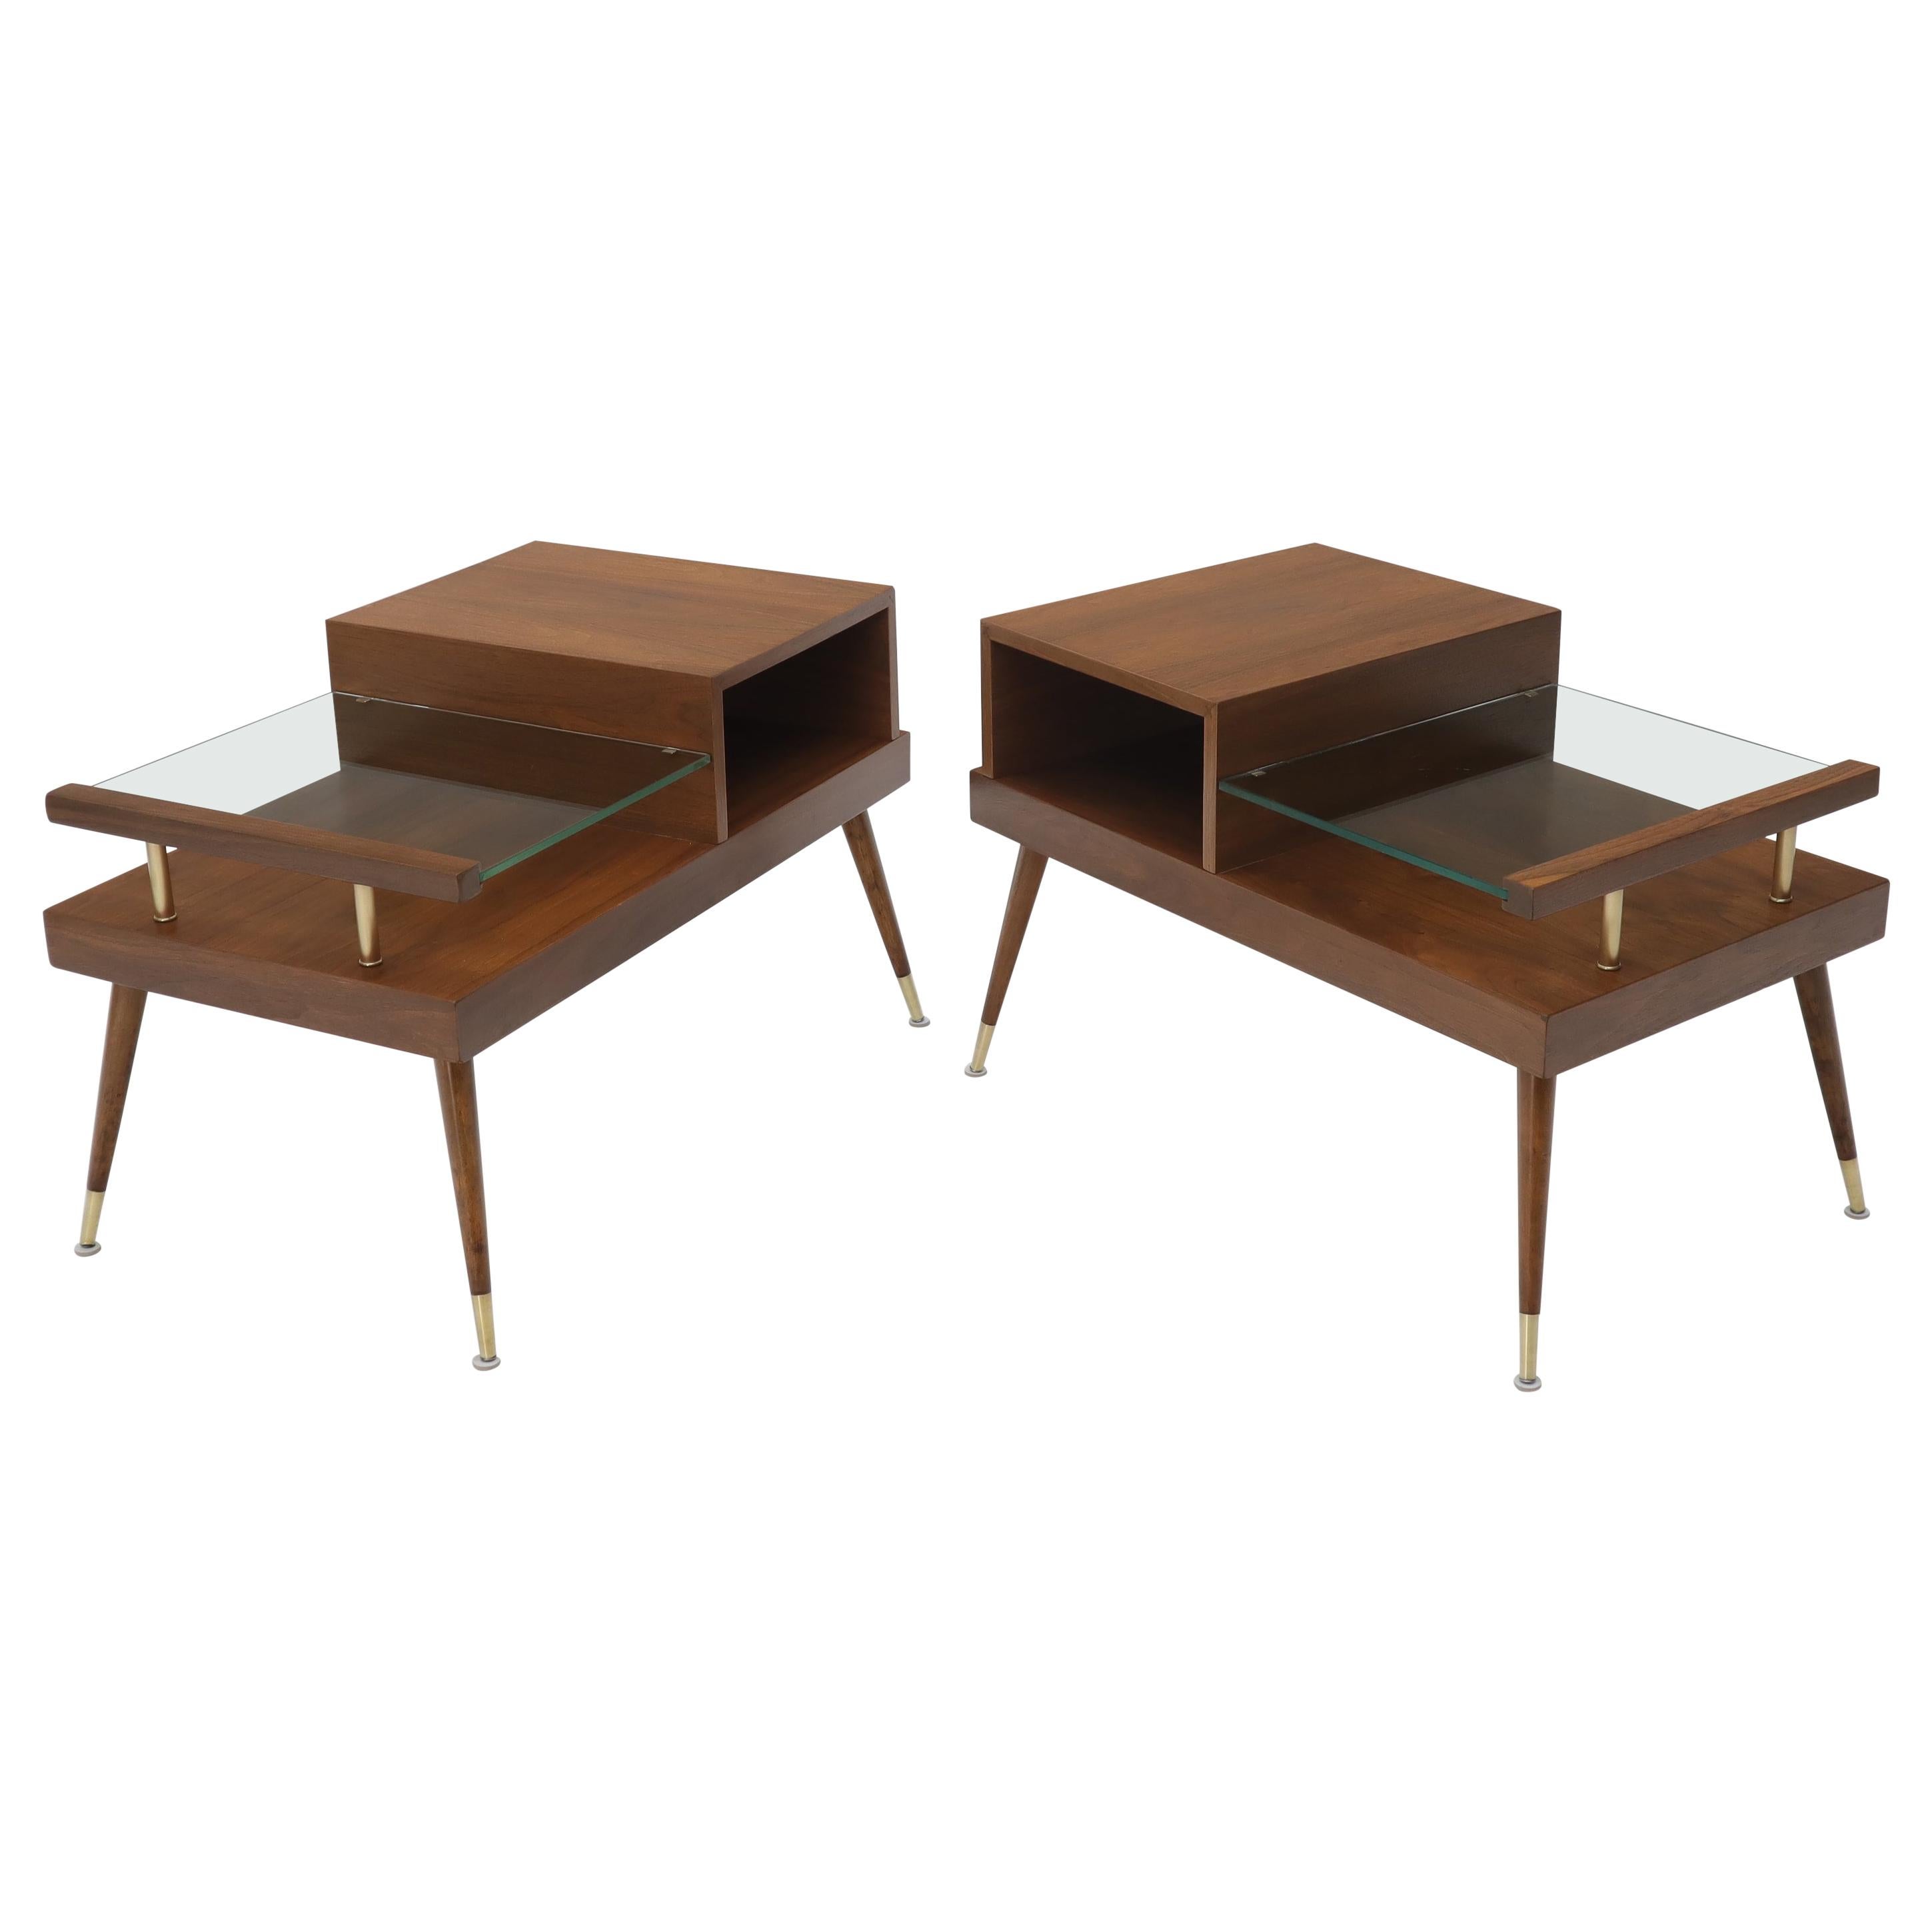 Pair of Walnut Side End Tables with Floating Glass Shelves